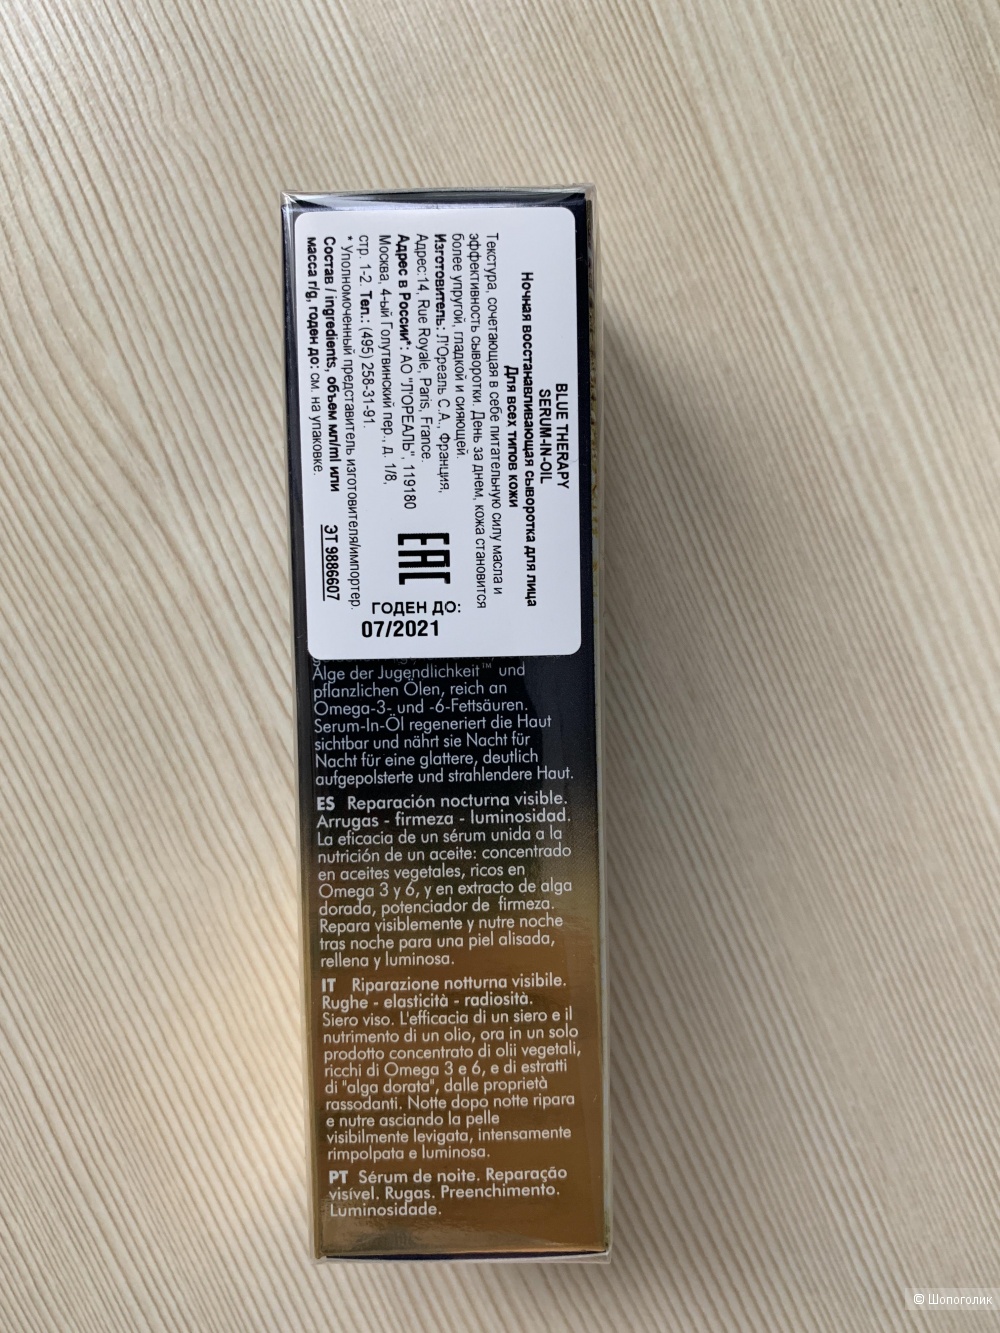 Biotherm Ночная сыворотка-масло Blue Therapy Serum in Oil, 30 мл.